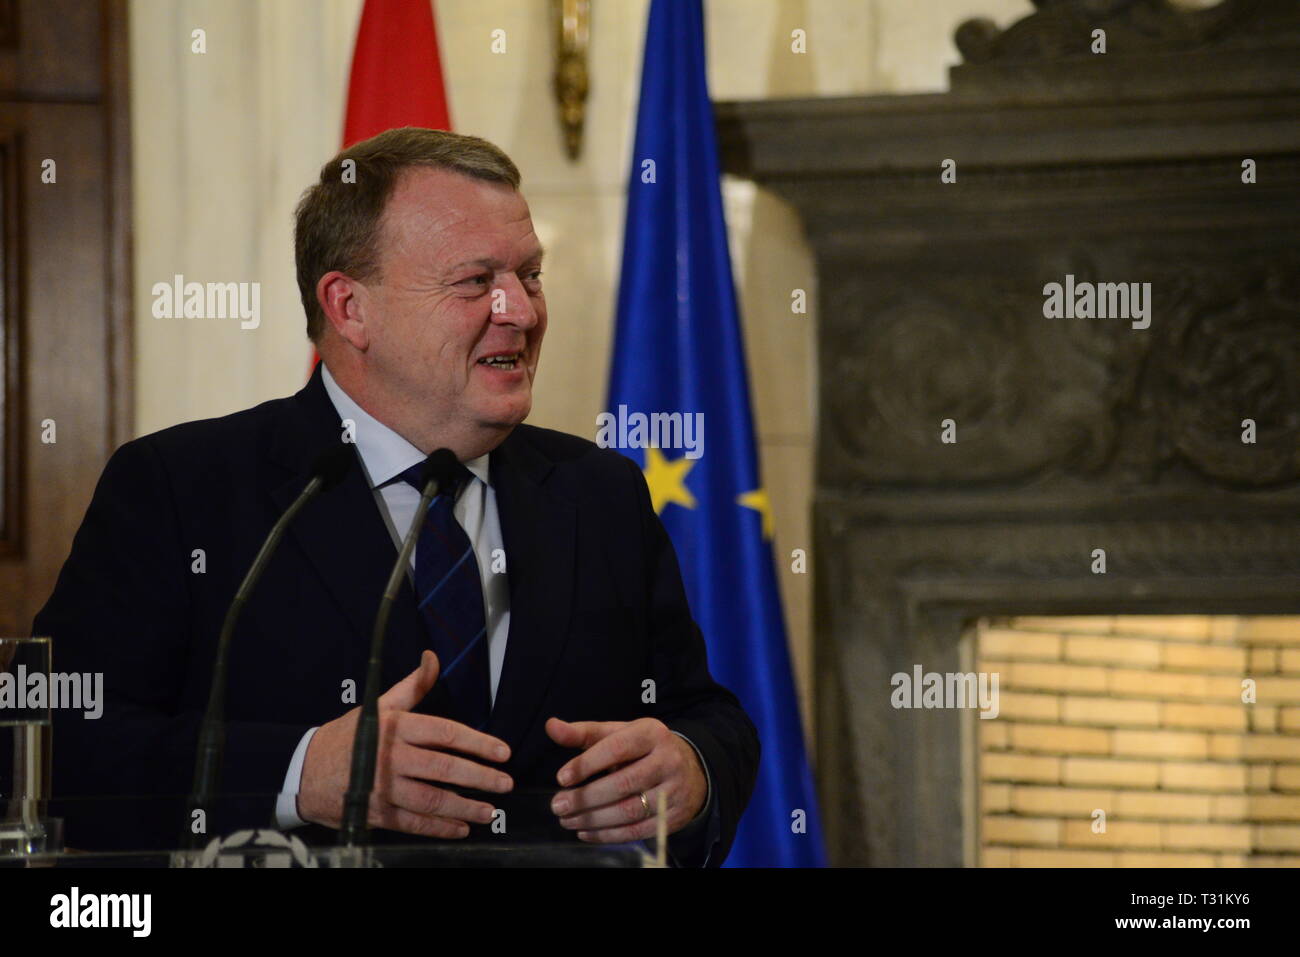 Prime Minister of Denmark, Lars Løkke Rasmussen, during the press conference with Greek Prime Minister Alexis Tsipras. (Photo by Dimitrios Karvountzis/Pacific Press) Stock Photo